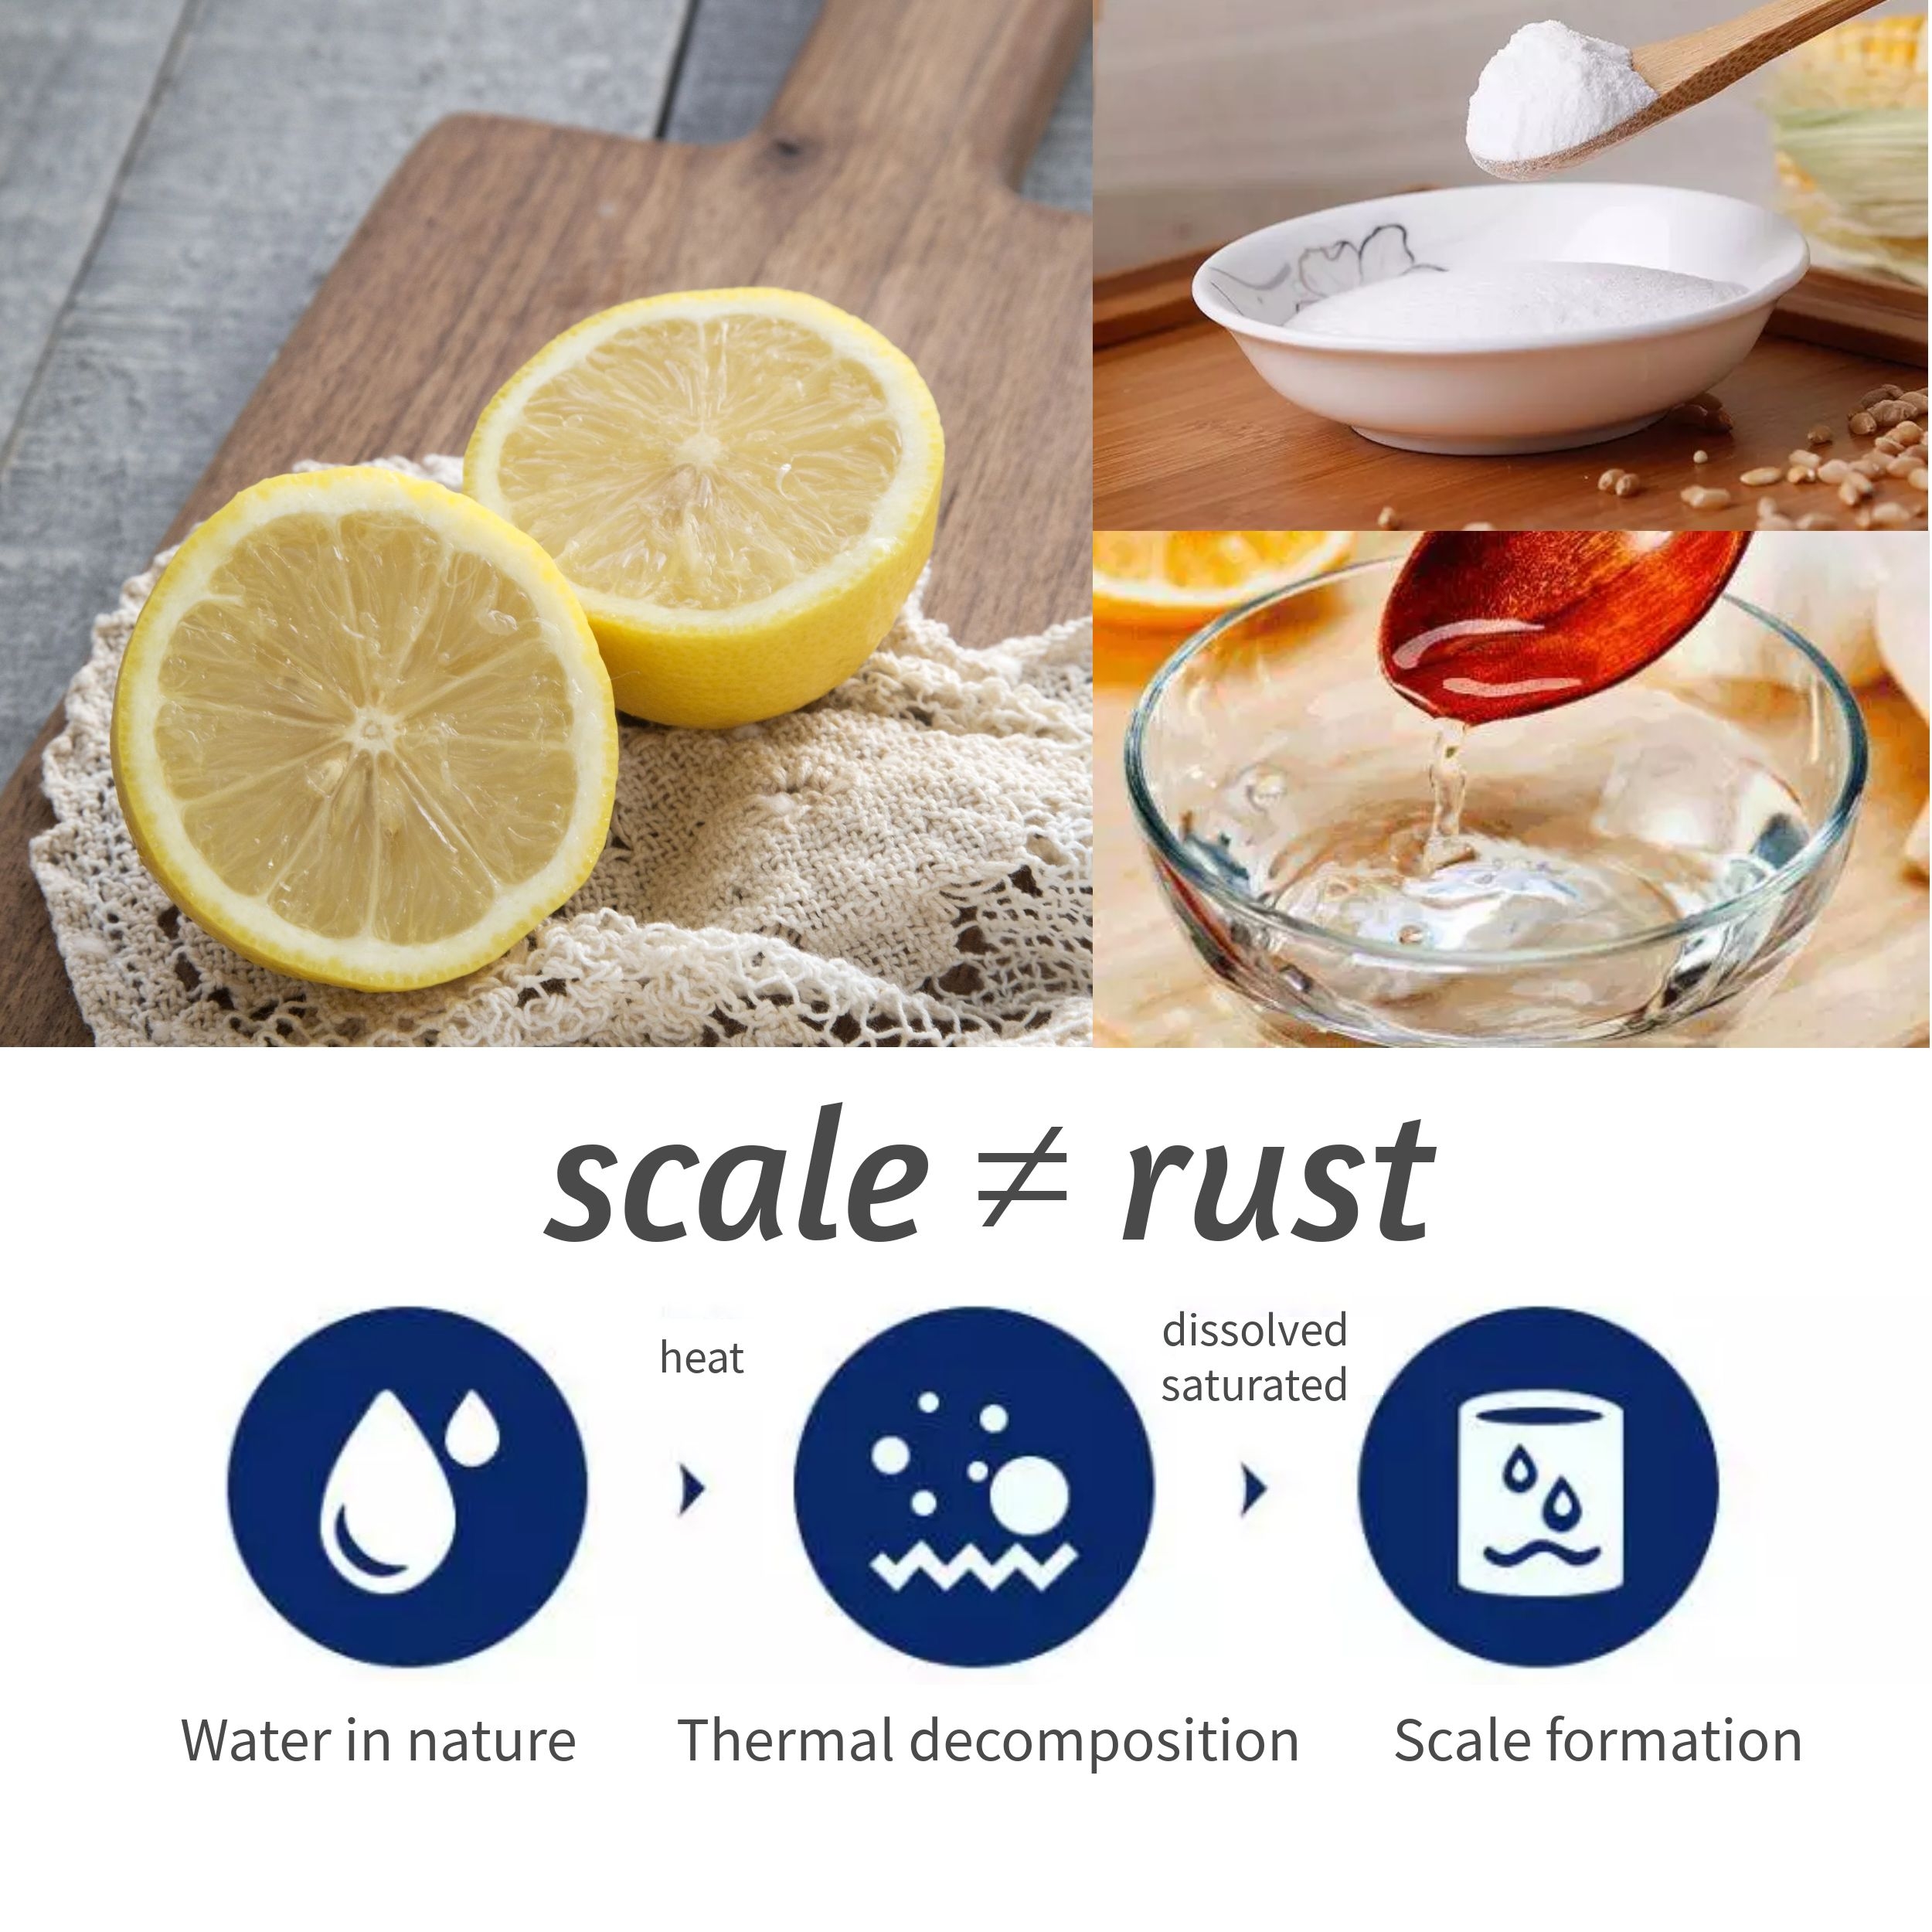 Scale is not equal to rust